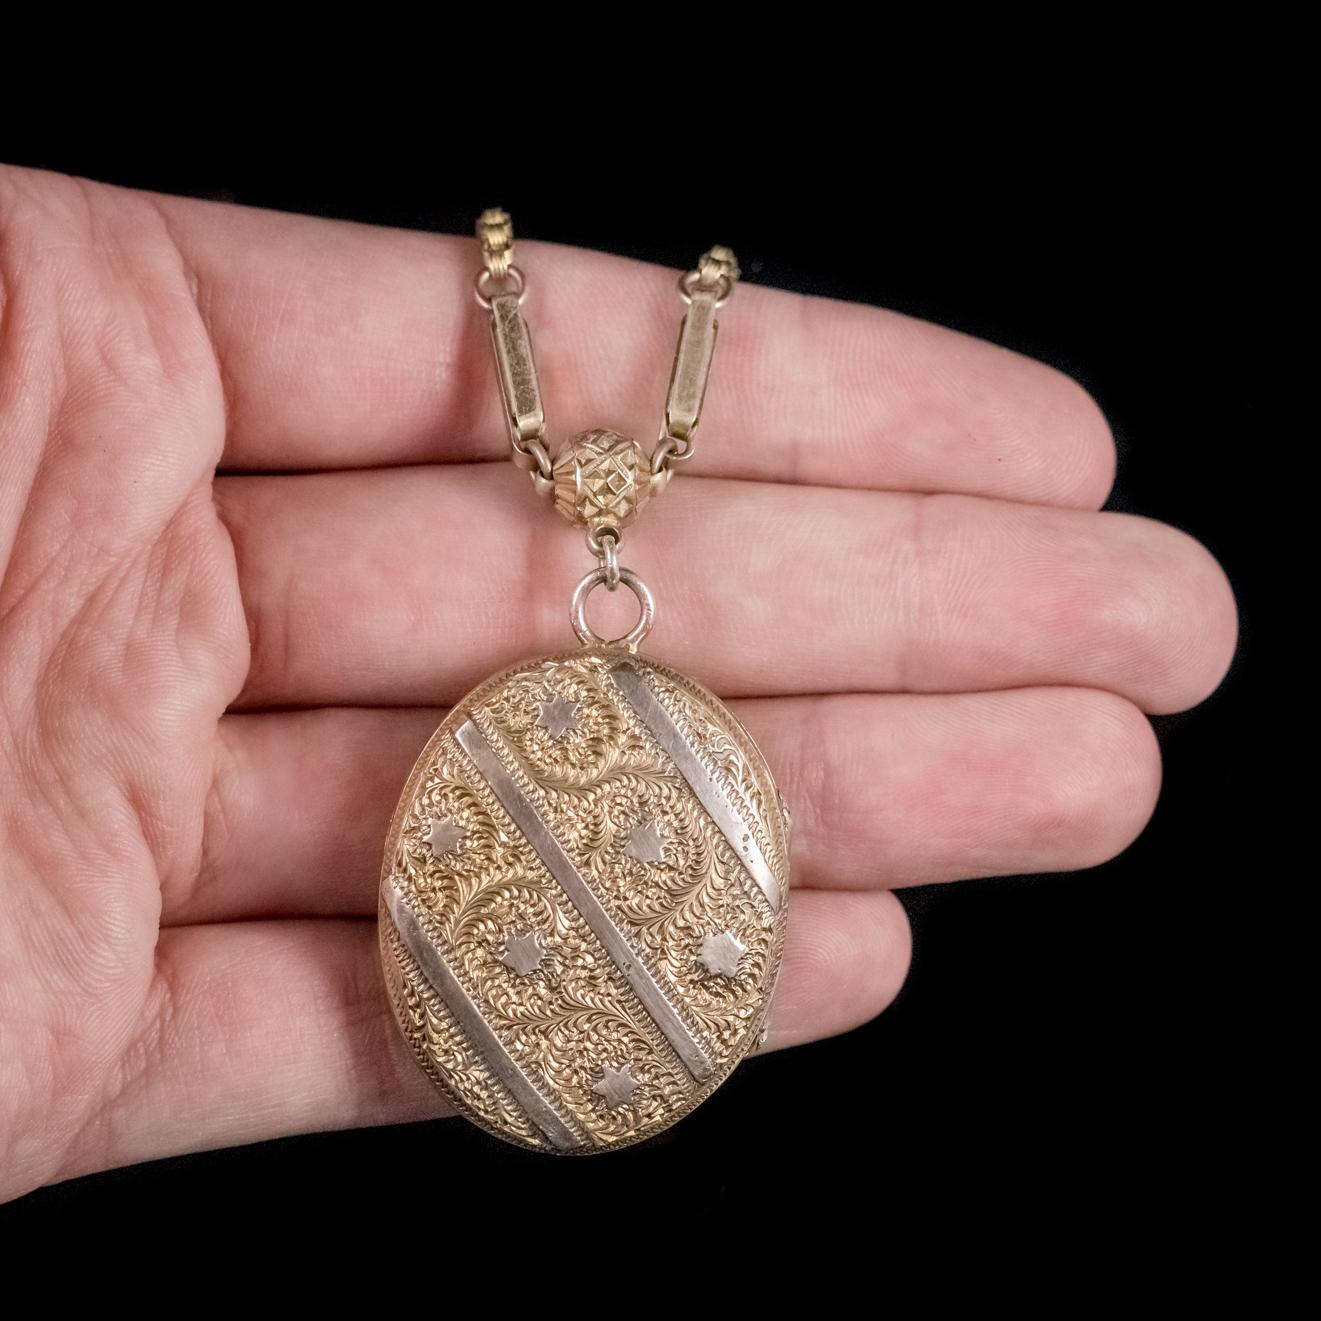 Antique Victorian Gold-Plated Locket Chain Necklace, circa 1900 For Sale 3